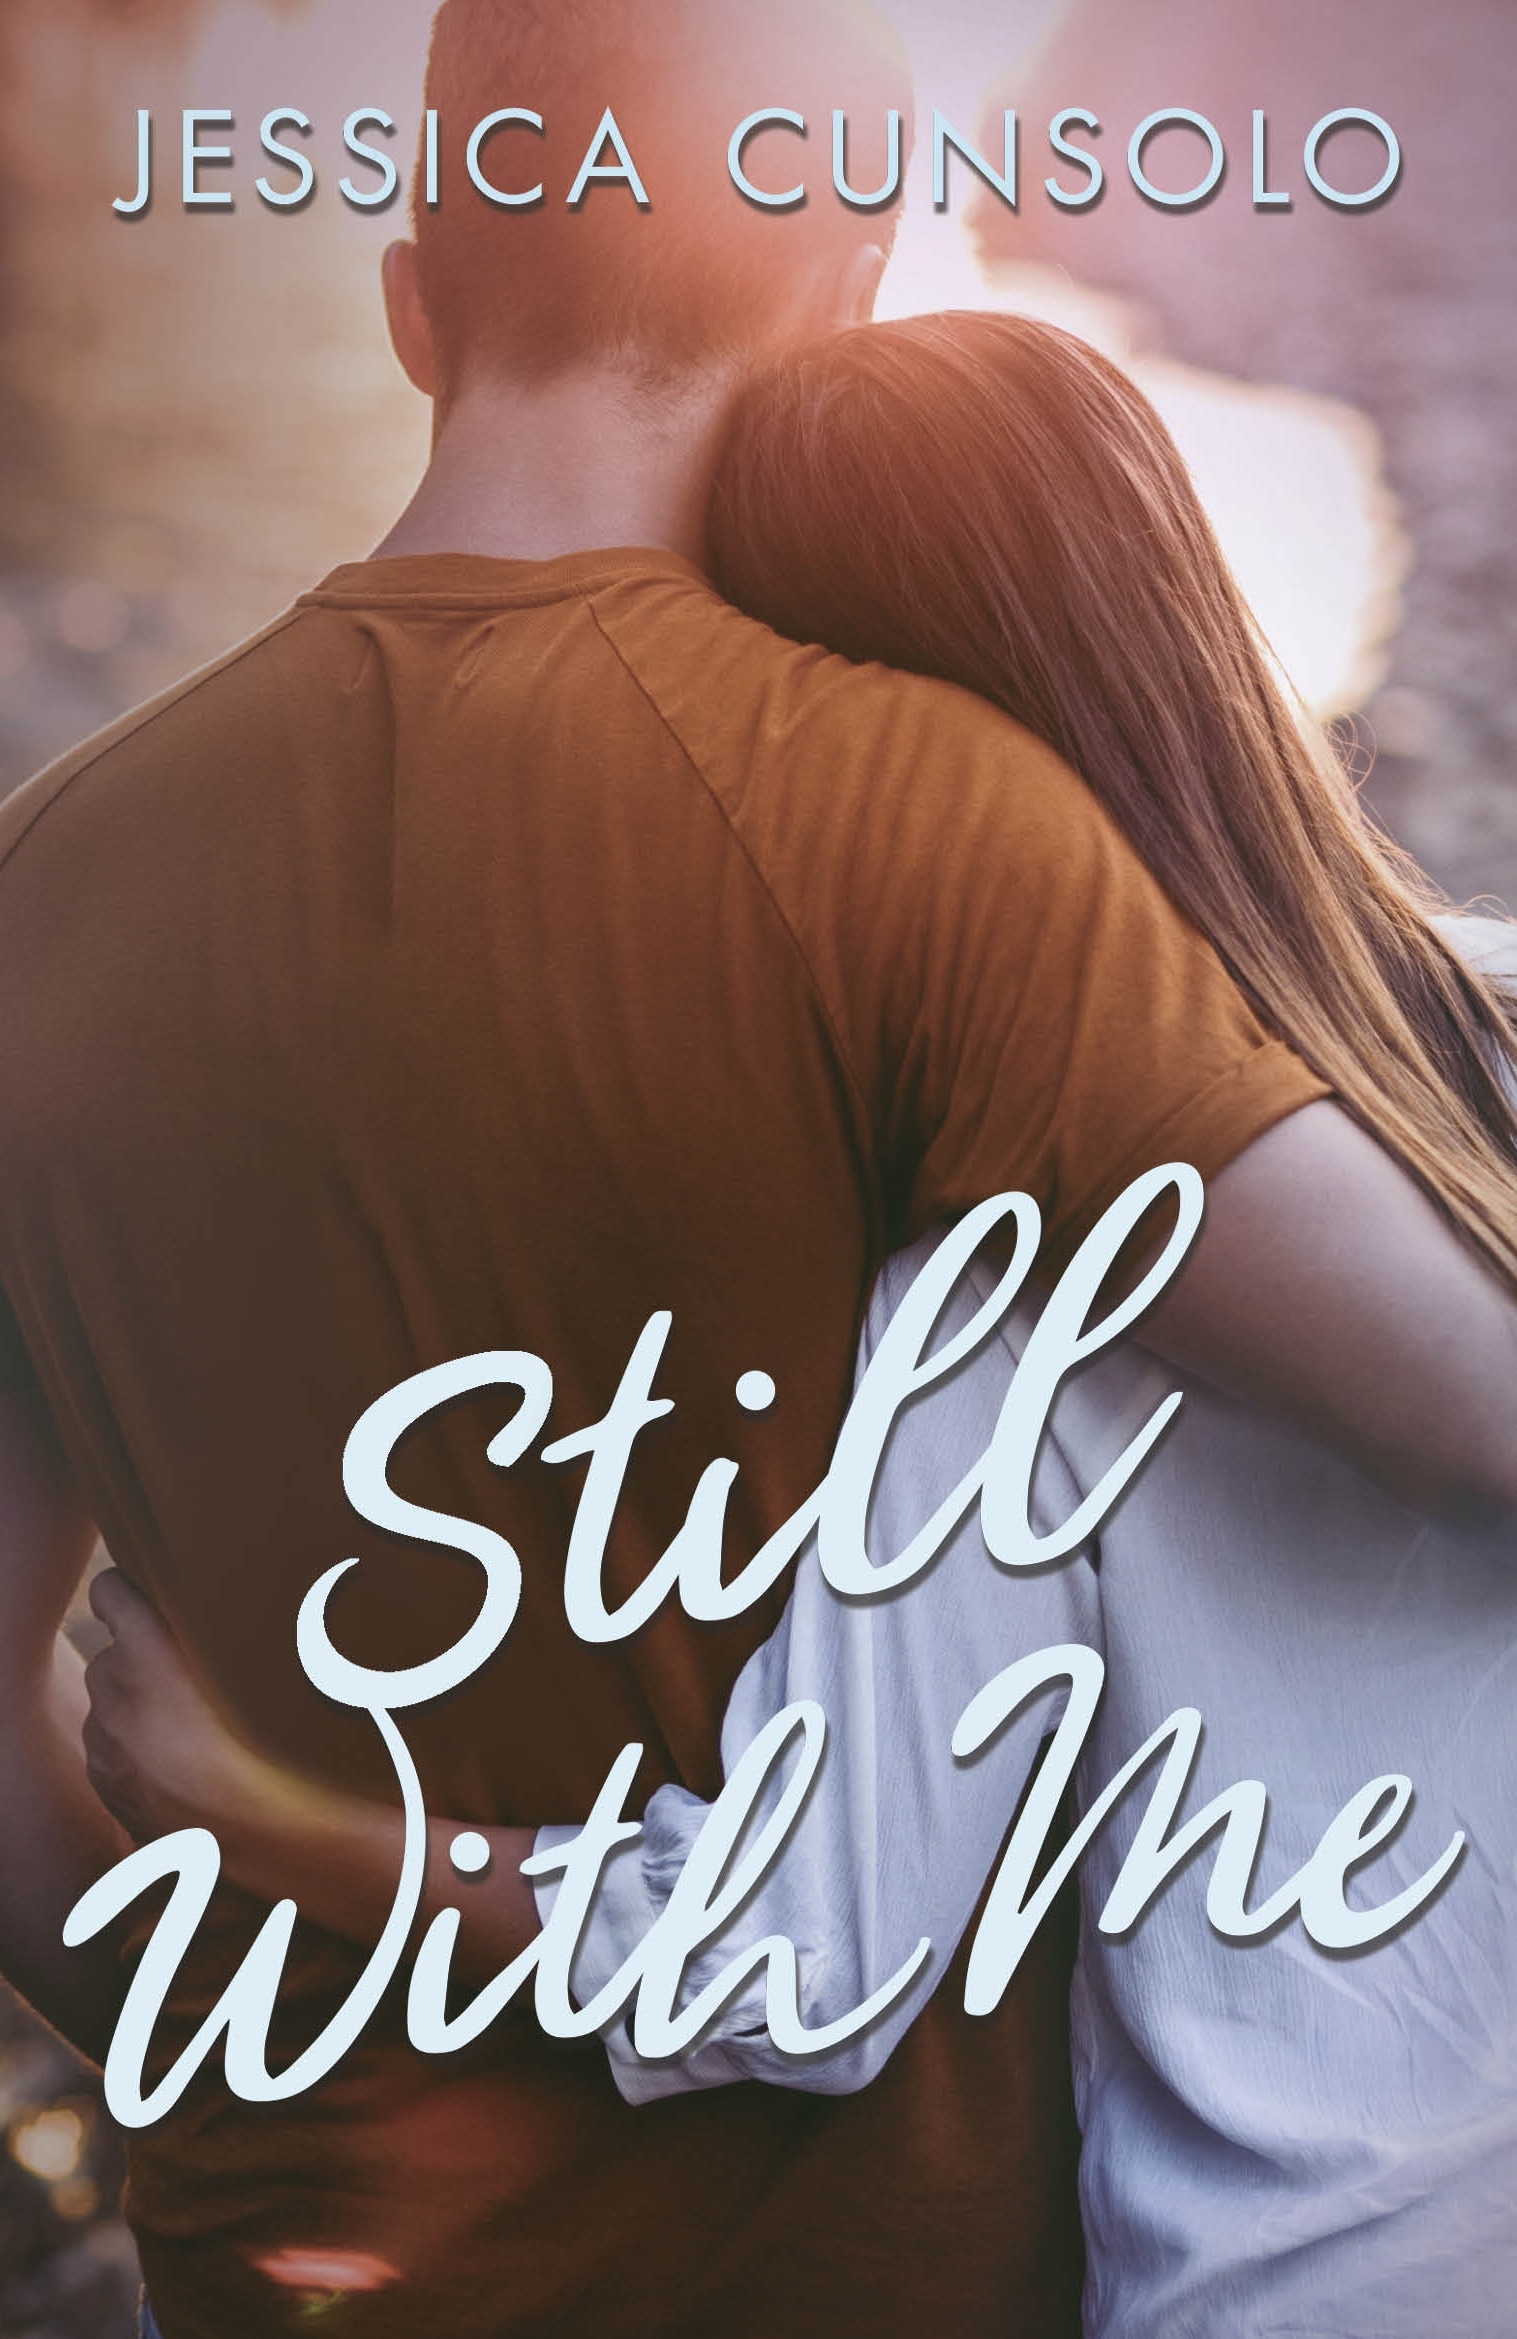 Book “Still with Me” by Jessica Cunsolo — August 4, 2022